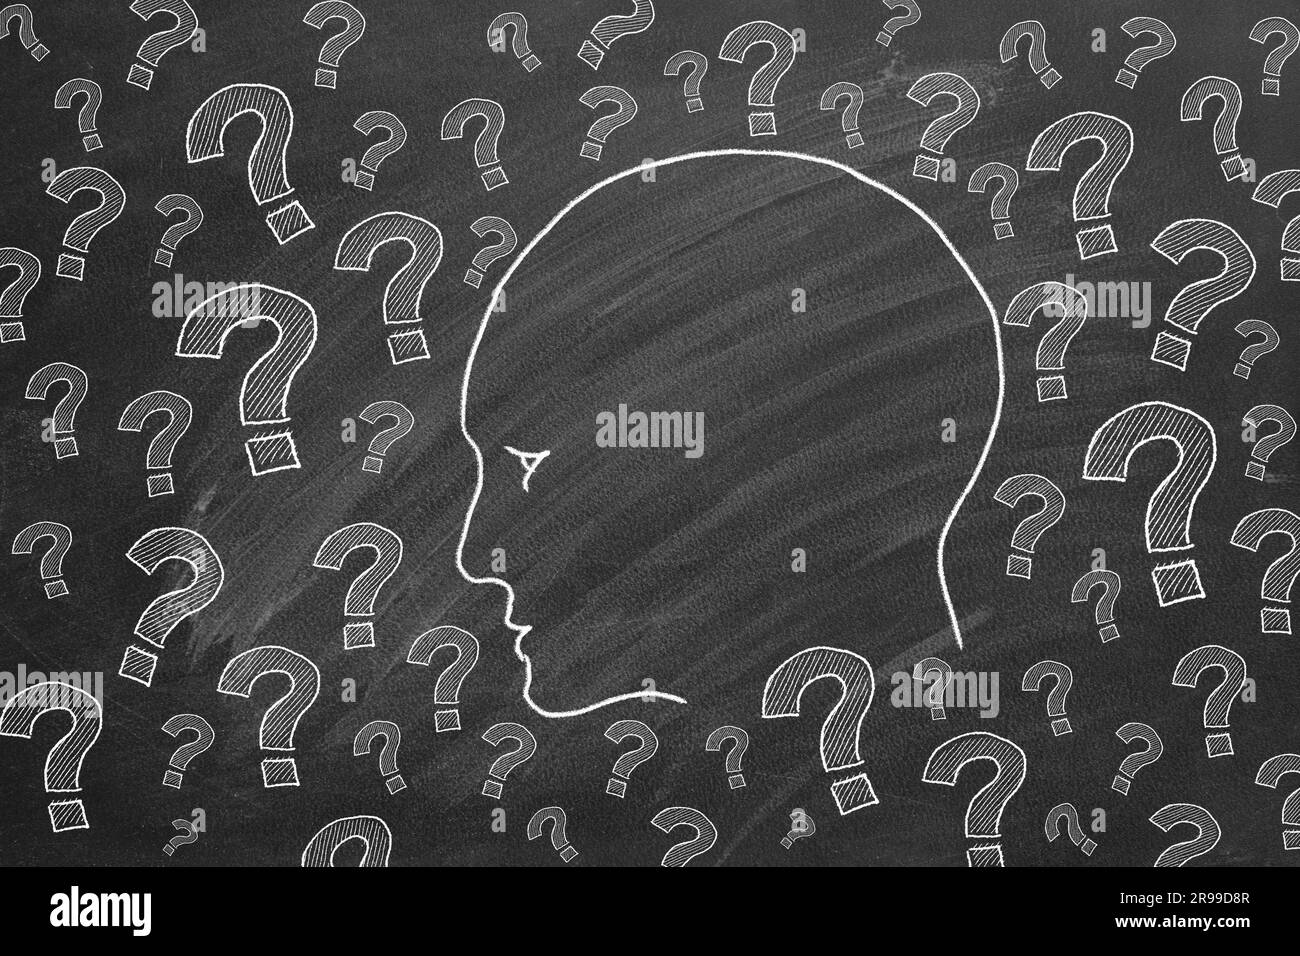 Human head with question marks. Illustration on blackboard. Stock Photo